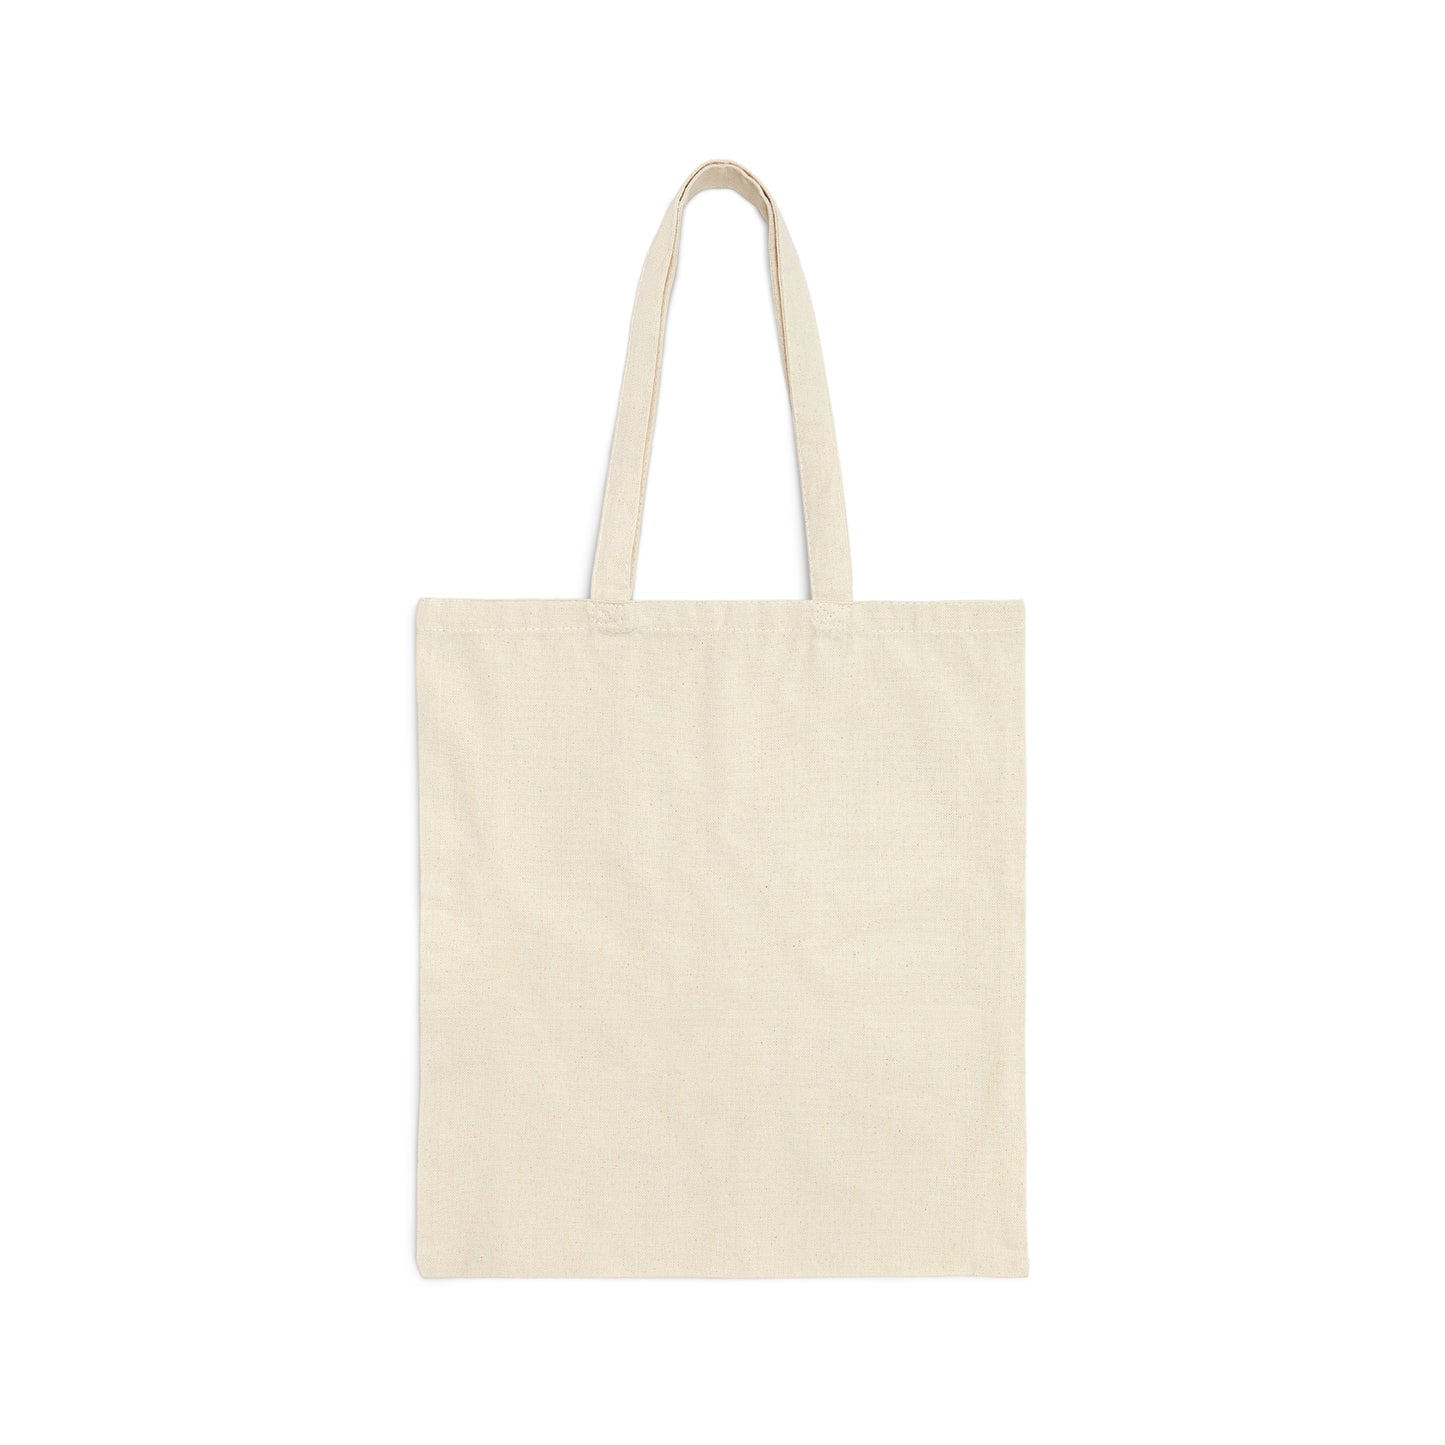 Send Noods Think Ramen Art Noodles Funny Food Abstract Minimalist Canvas Shopping Cotton Tote Bag